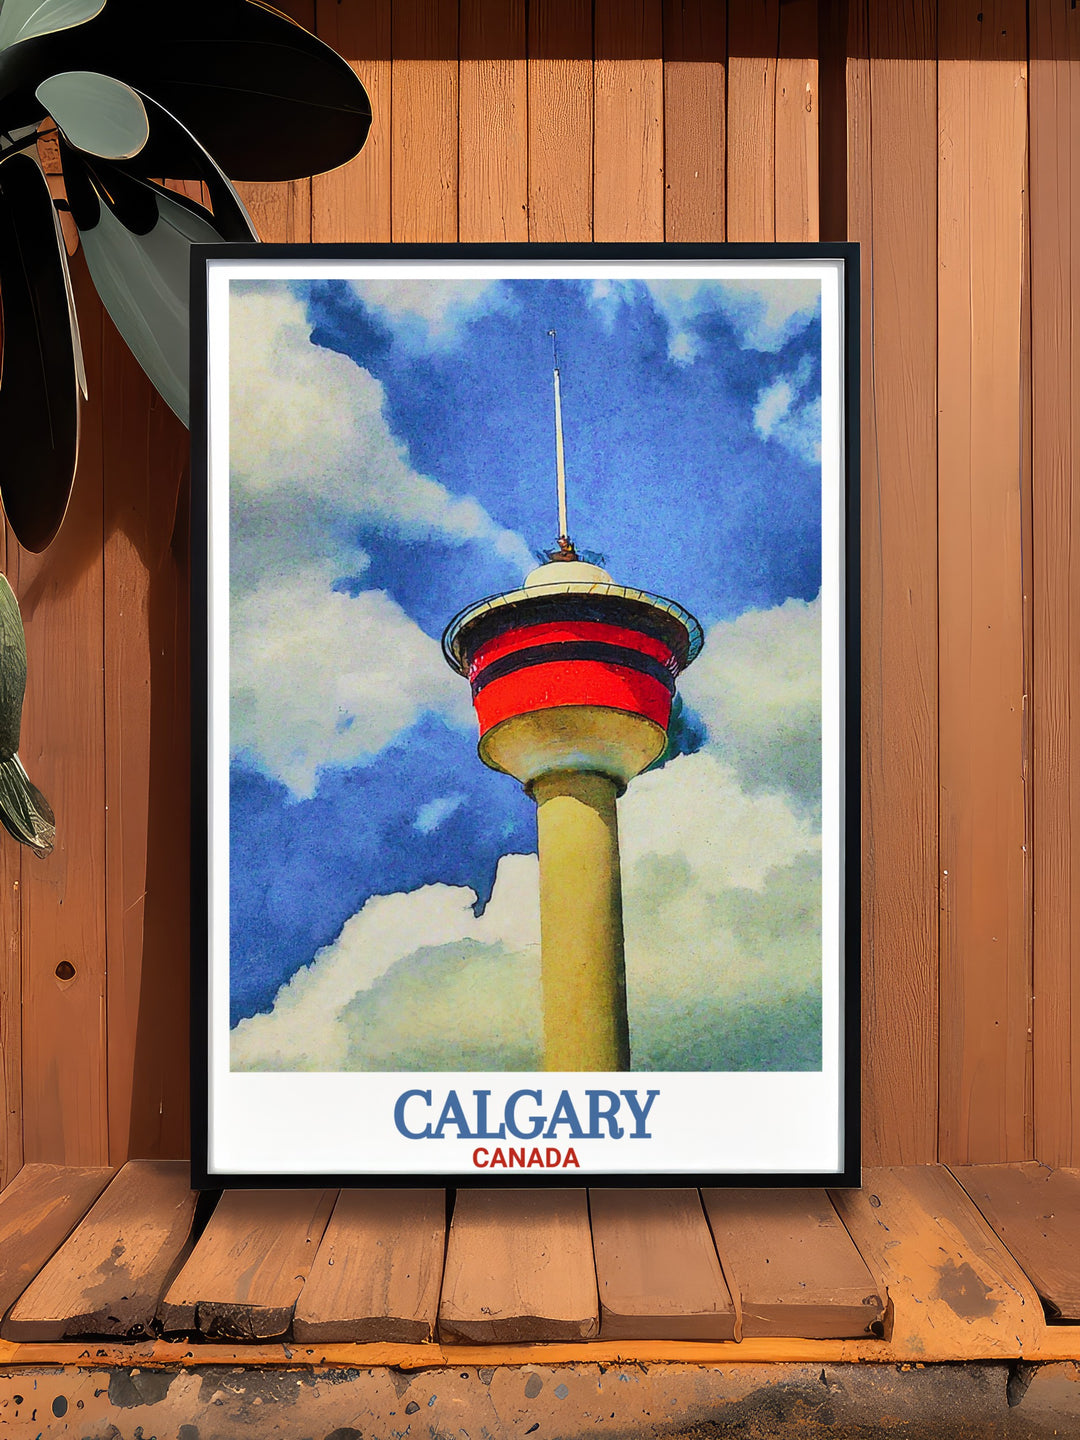 Calgary Tower wall art that captures the vibrant energy of the city. This Canada travel print is perfect for those who want to bring a piece of Calgarys iconic skyline into their home or office space.